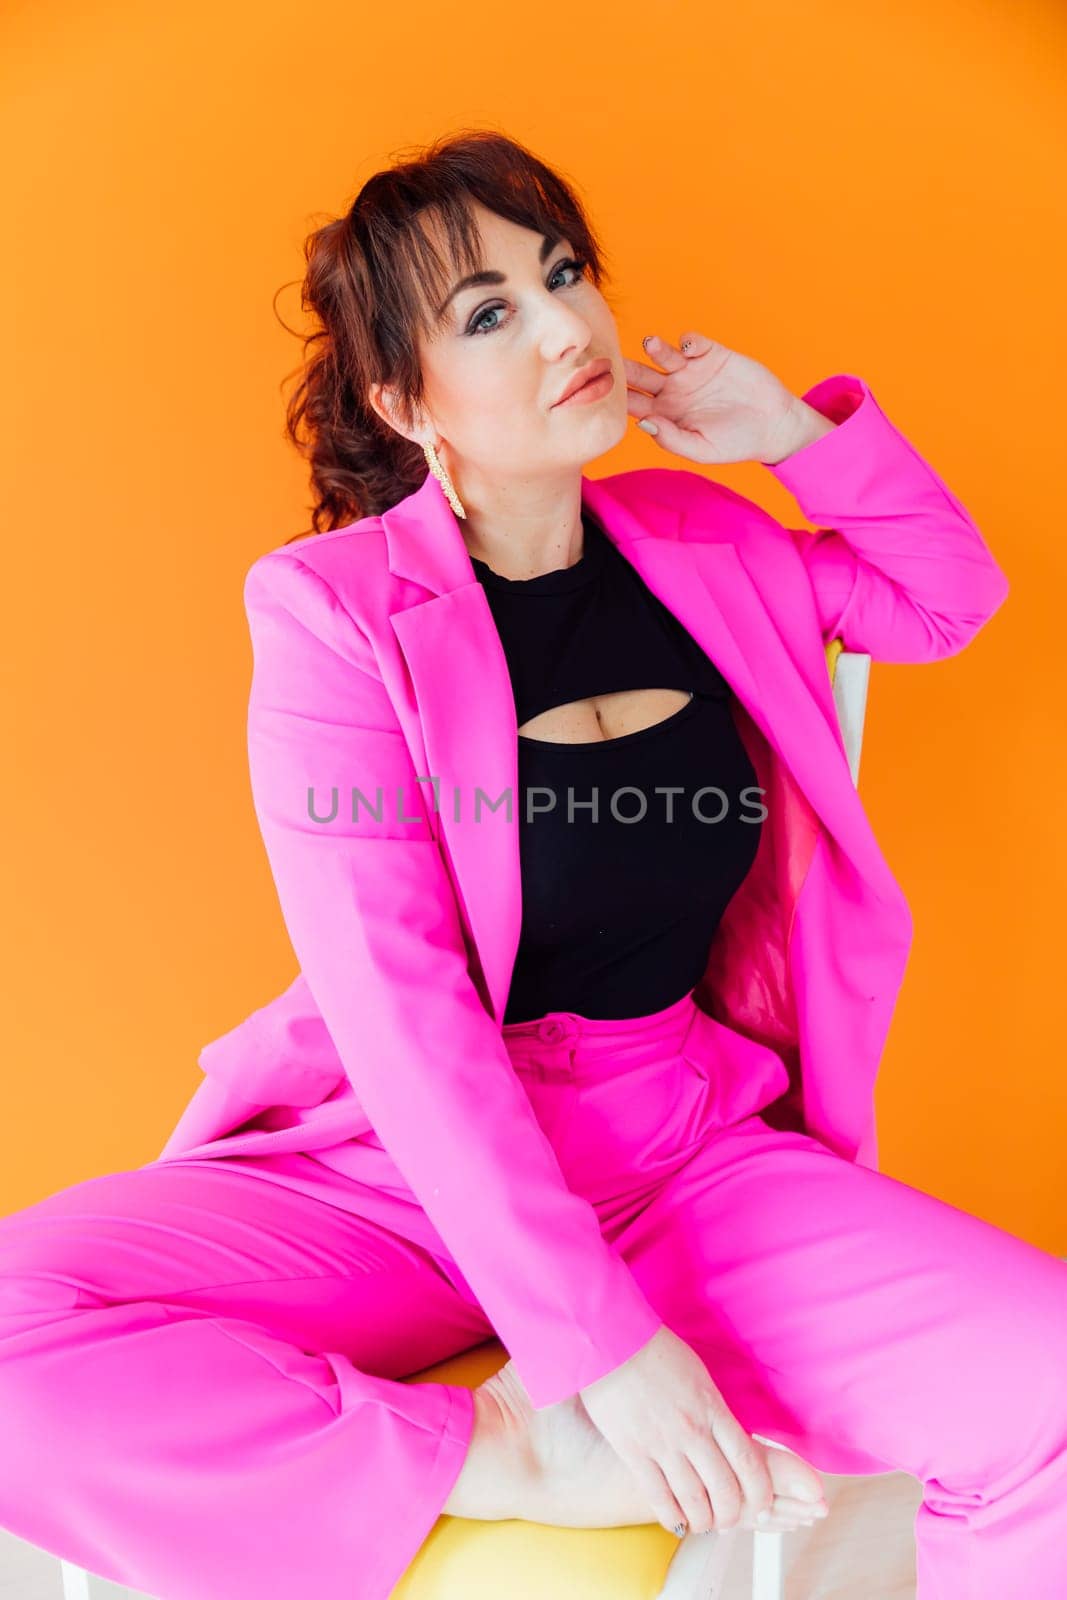 a woman in bright clothes on a chair on an orange background by Simakov